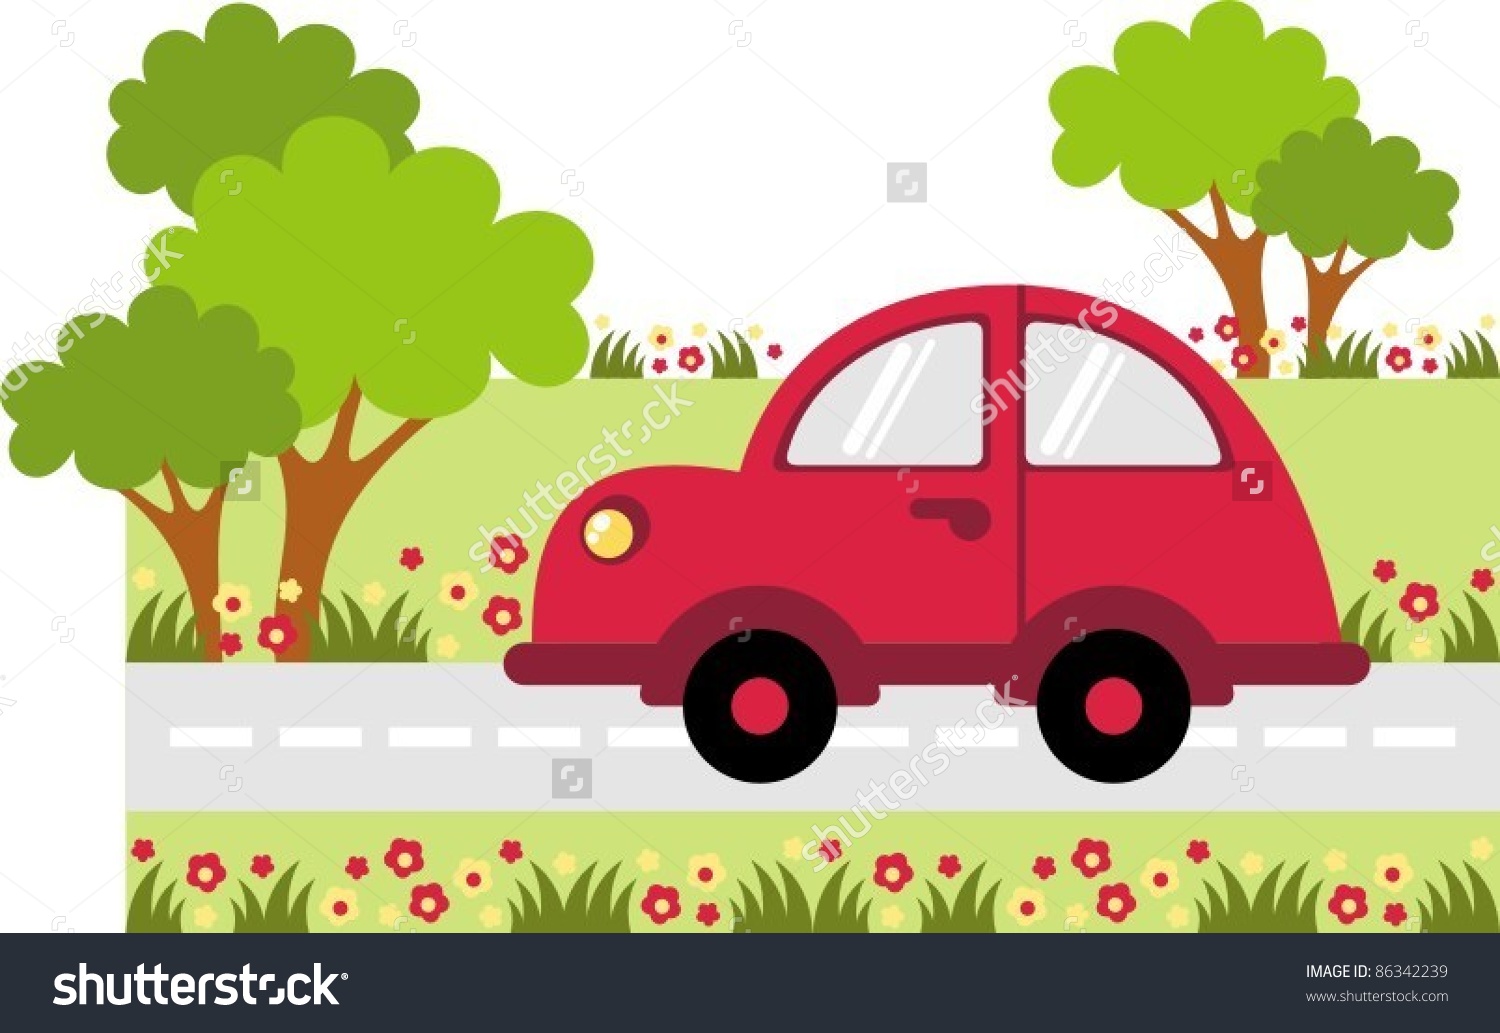 Small Car Traveling On Road Along Stock Vector 86342239.